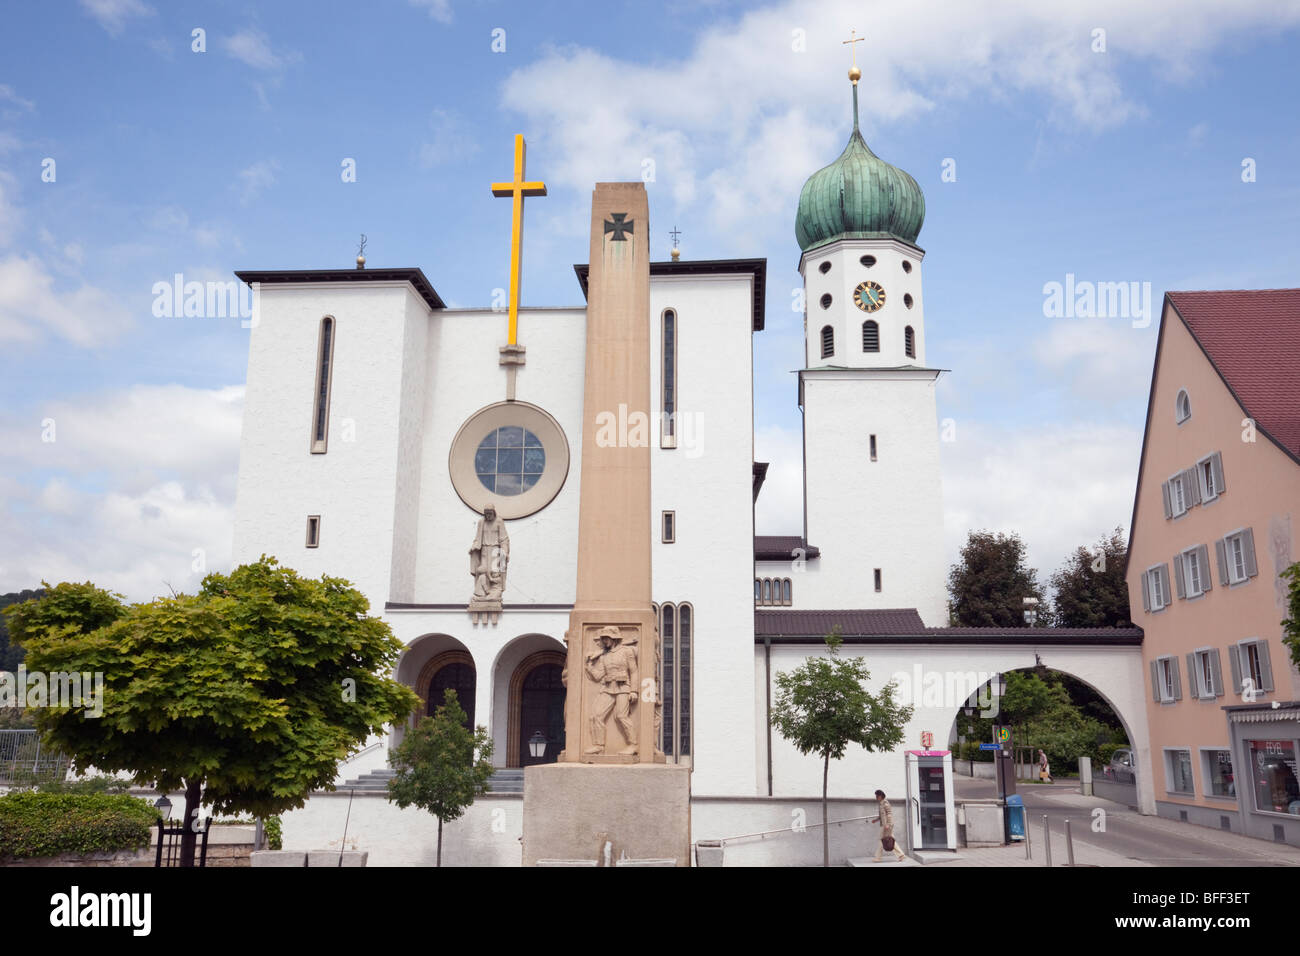 Stockach, Baden Wurttenburg, Germany, Europe. War memorial in front of large modern white church building in historic small town Stock Photo